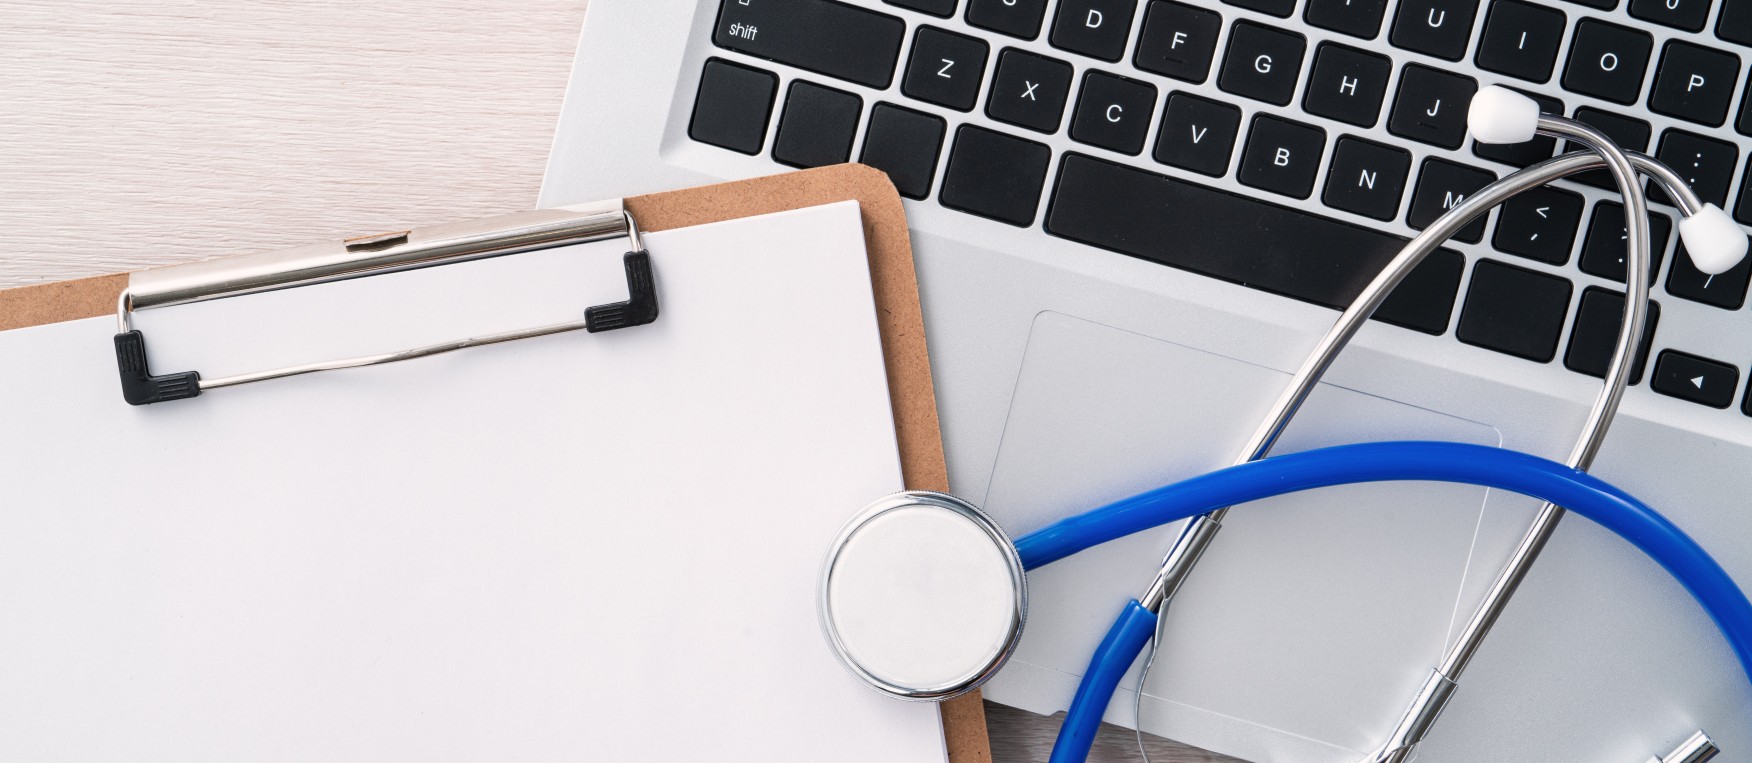 Stethoscope on laptop computer keyboard with medical record clipboard design concept.